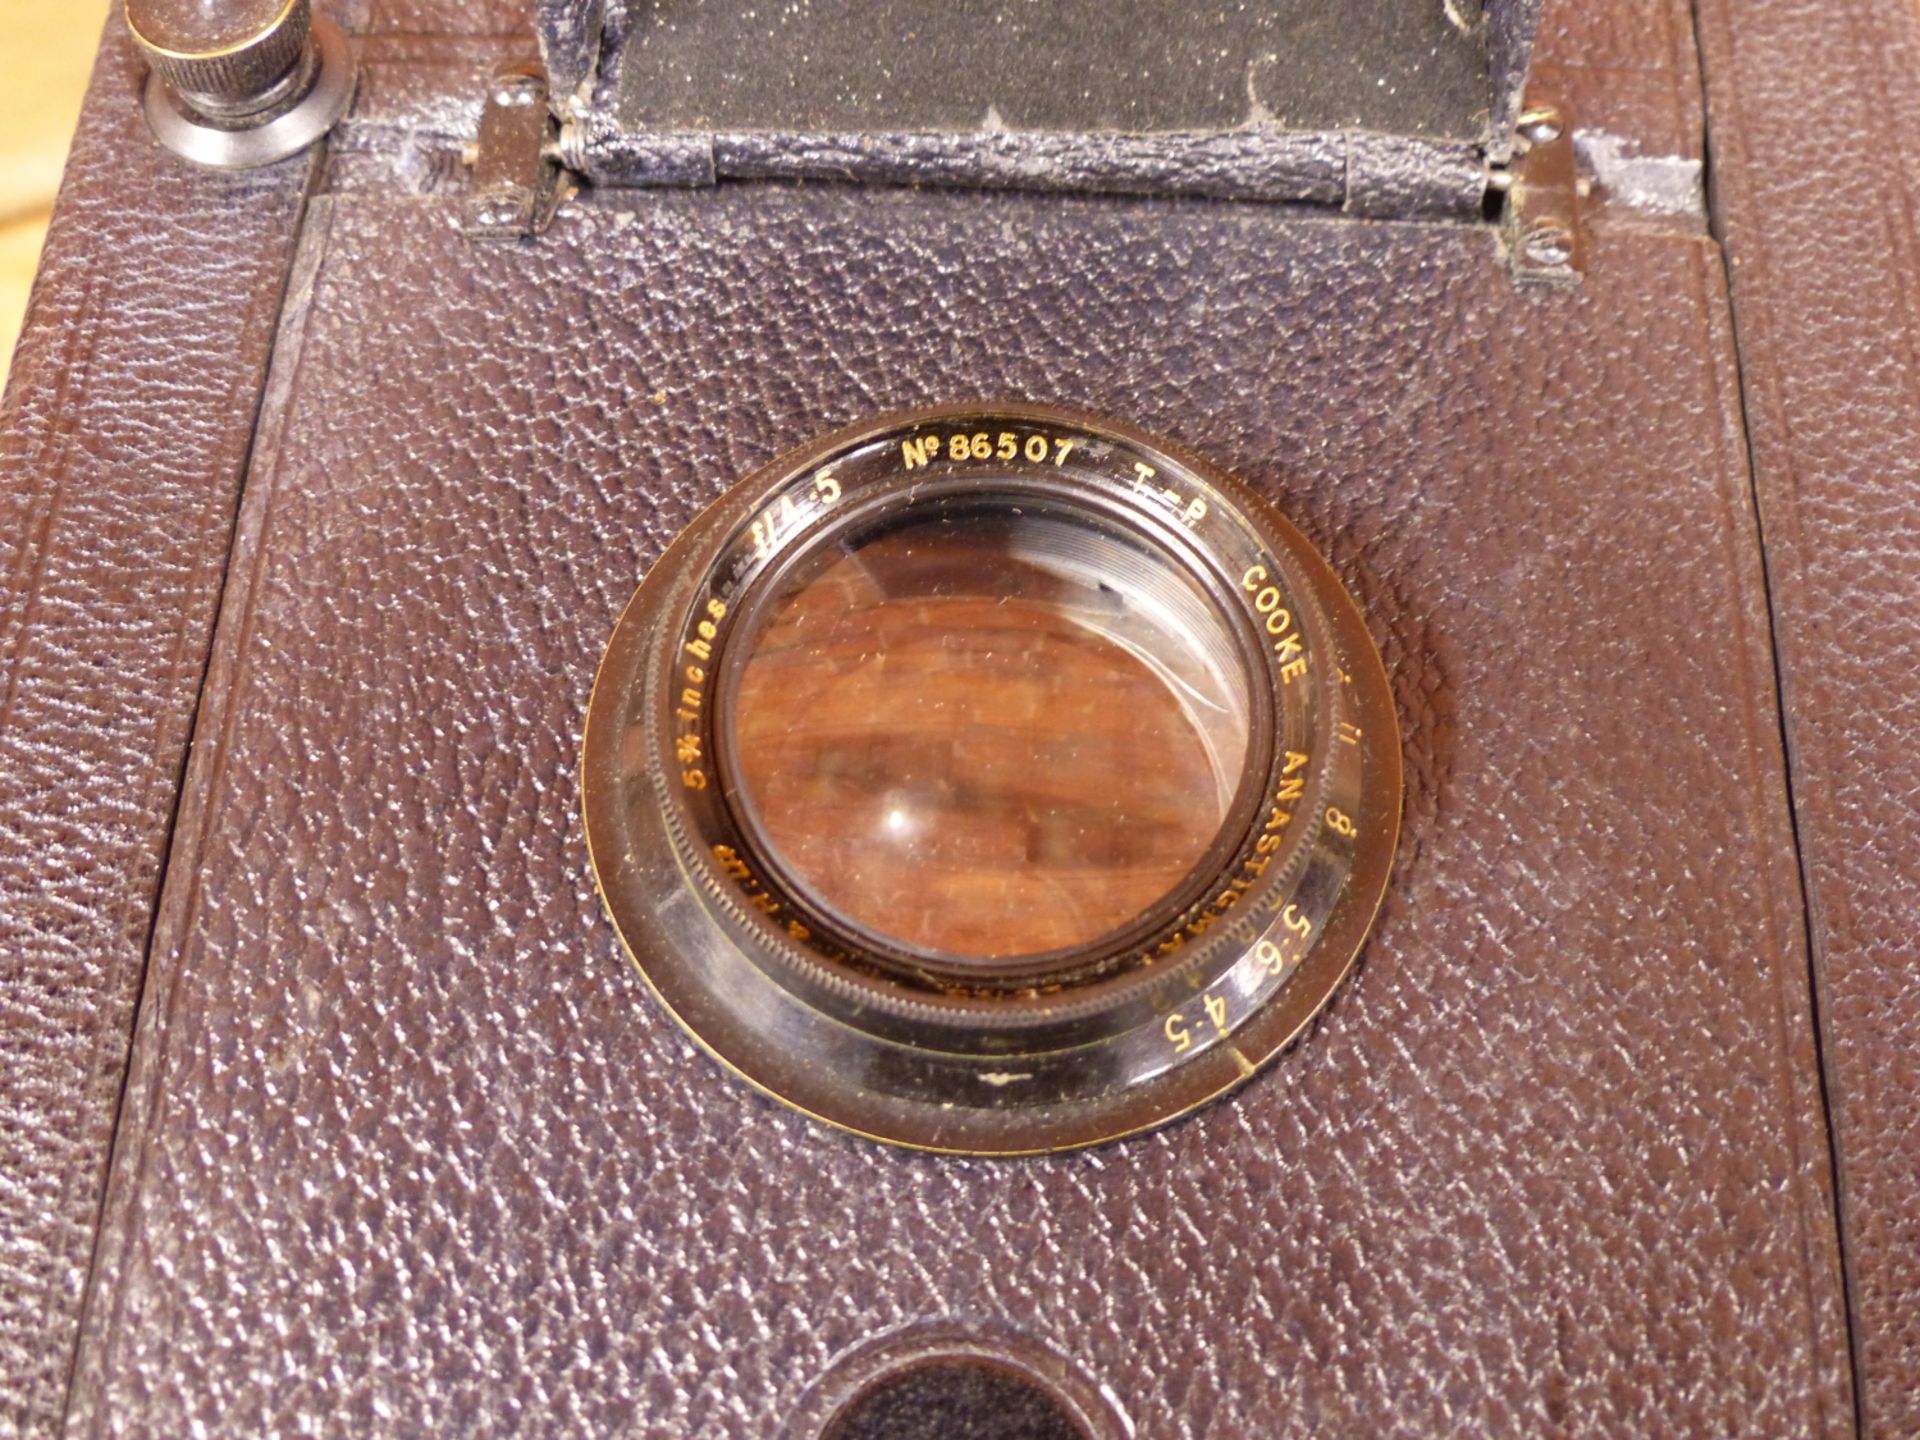 A VINTAGE EARLY 20TH CENTURY THORNTON PICKARD 1/4 PLATE CAMERA IN ORIGINAL CANVAS CASE WITH PLATE - Bild 7 aus 15